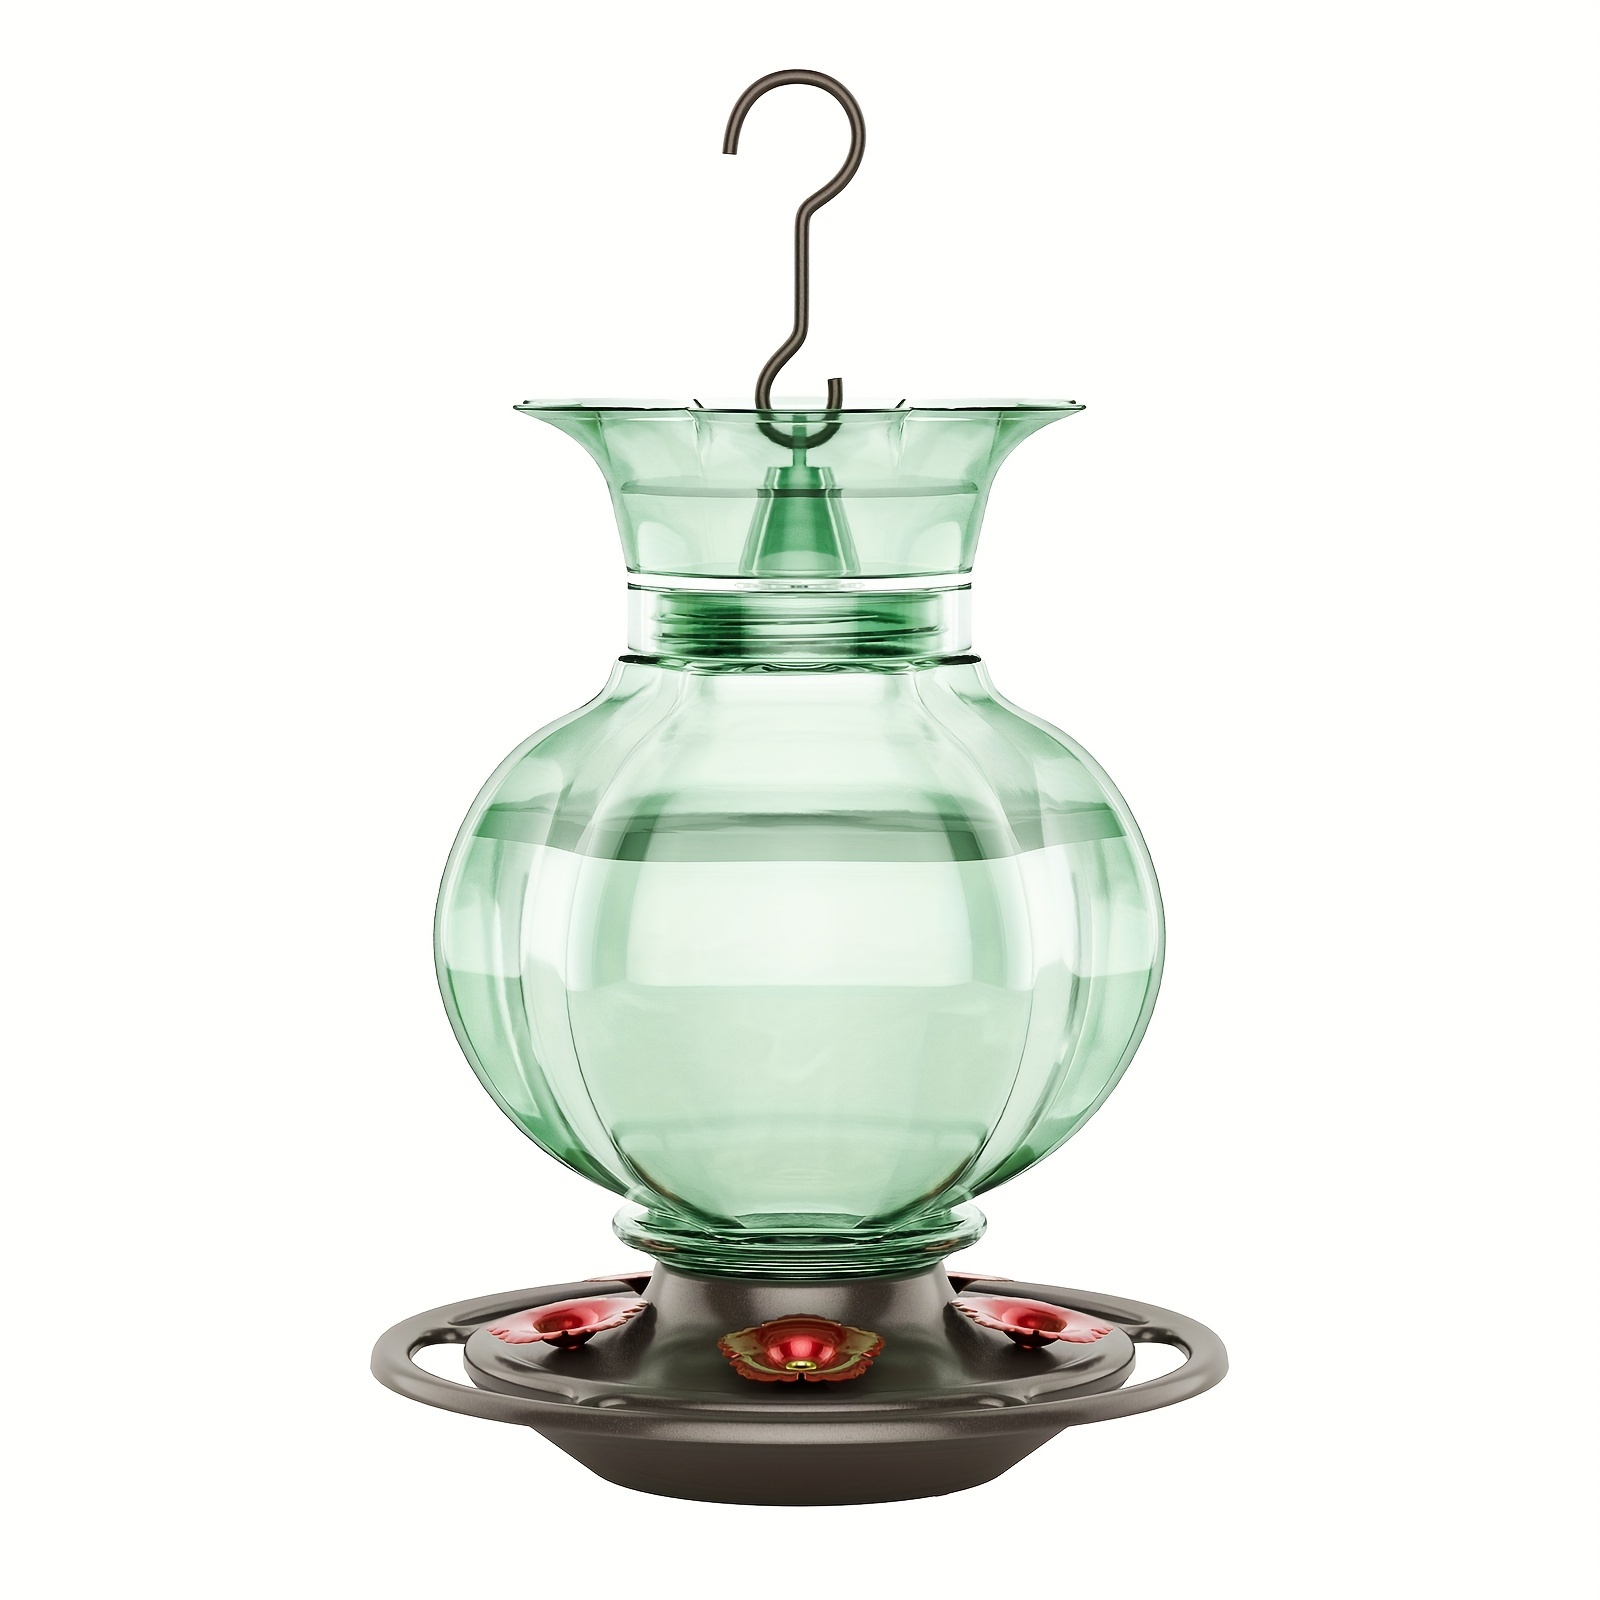 

Hummingbird Feeder, Green Glass Hummingbird Feeder For Outdoors Hanging With Ant Moat, 5 Simulation Flowers Feeding Ports, 23 Ounces, Rustproof, Fade Proof, Pomegranate Shape